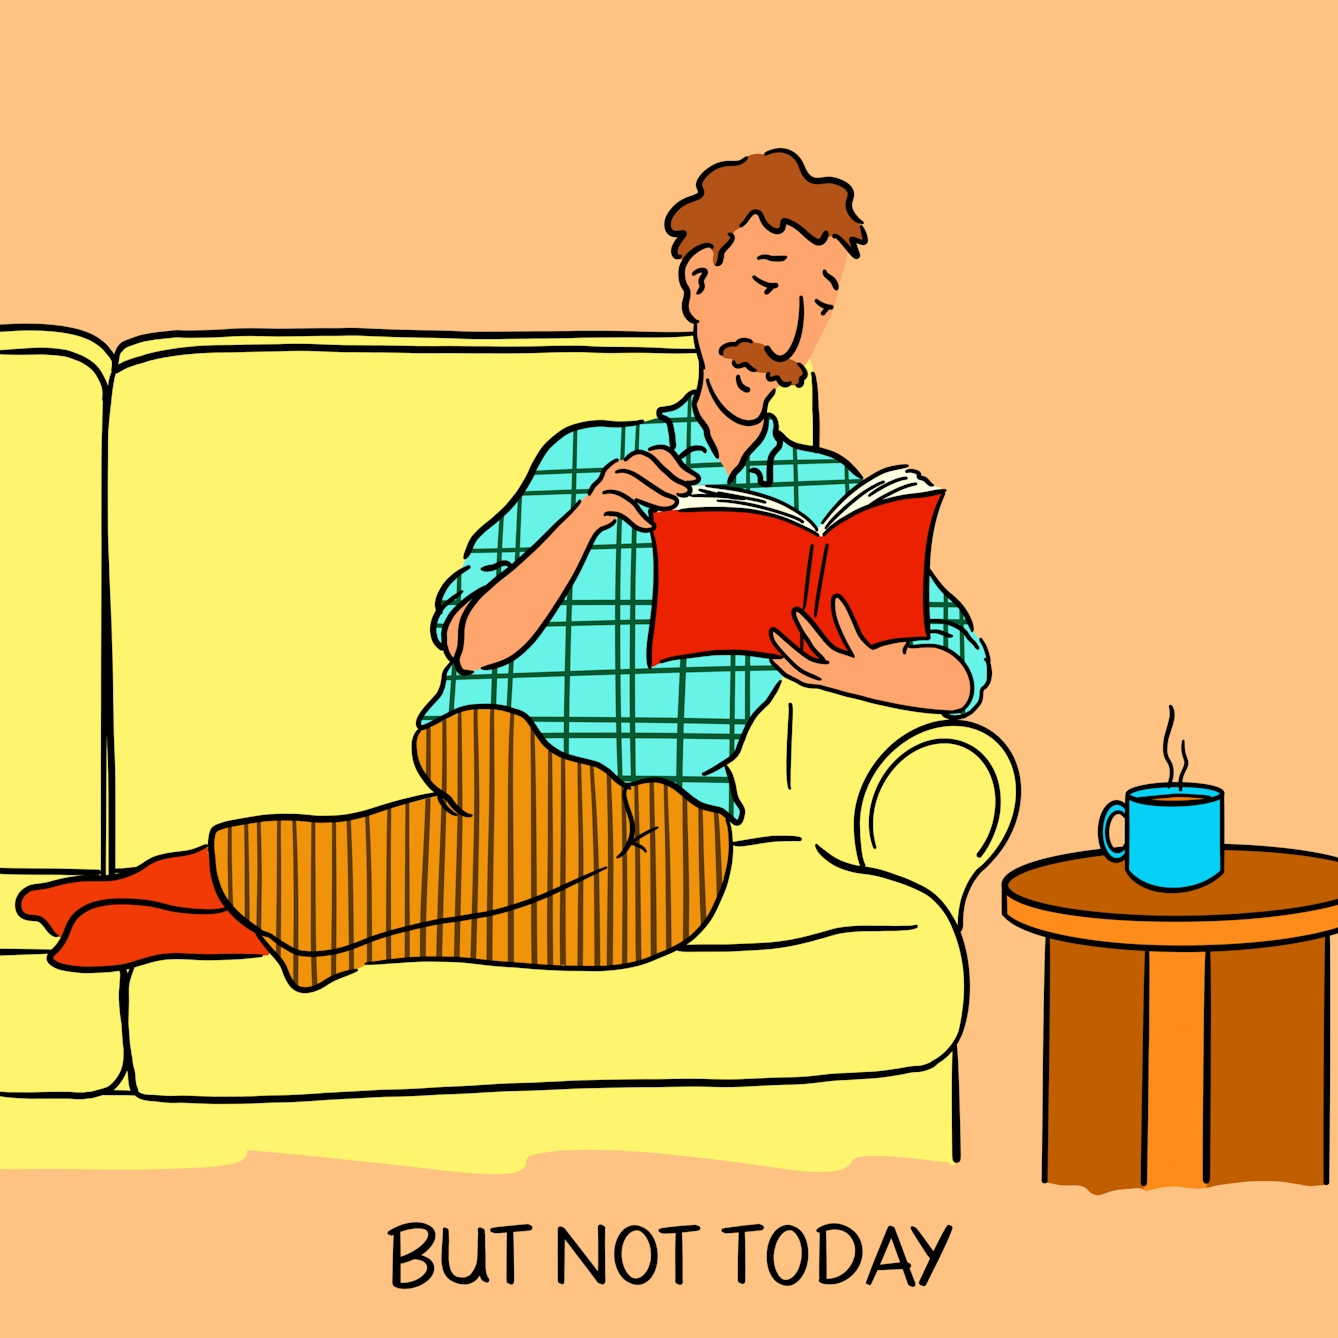 Panel 4 of a four-panel comic drawn digitally: a white man with a moustache, corduroy trousers and a plaid shirt sits serenely on a sofa with legs curled up beneath him, book in hand and steaming hot mug of tea on the table beside him. The caption text reads "But not today."